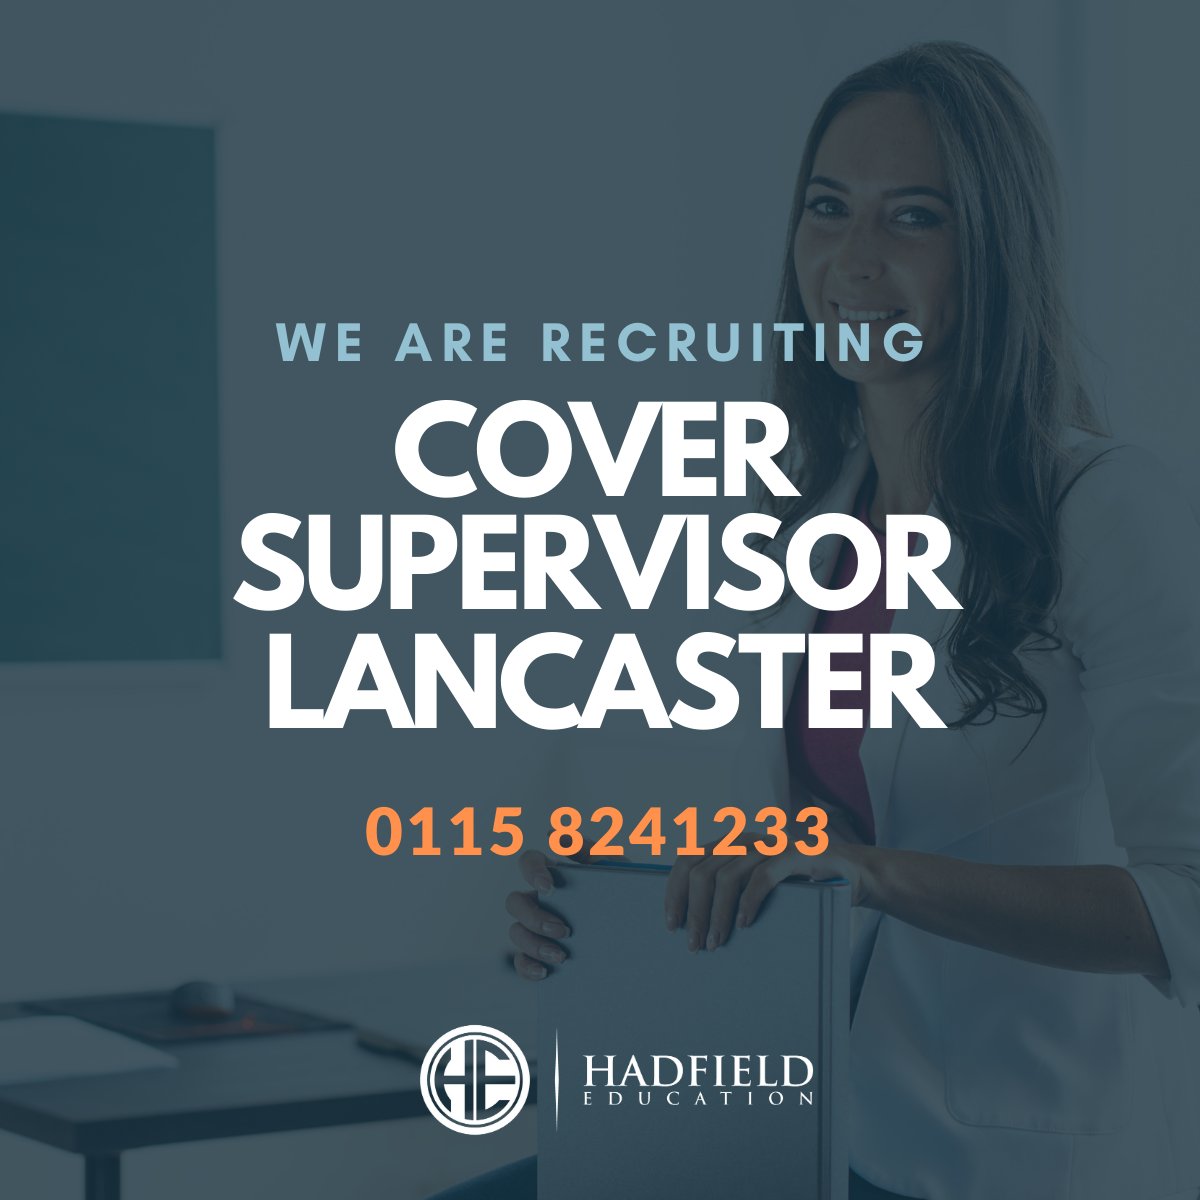 🎓 Dream job alert! 🎓 We're seeking a Cover Supervisor in 📍Lancaster! 🌟 Apply now and be part of our great team! 💼 #LancasterJobs #TeachingJobs #CoverSupervisorJobs 📝 bit.ly/3OS5WYX